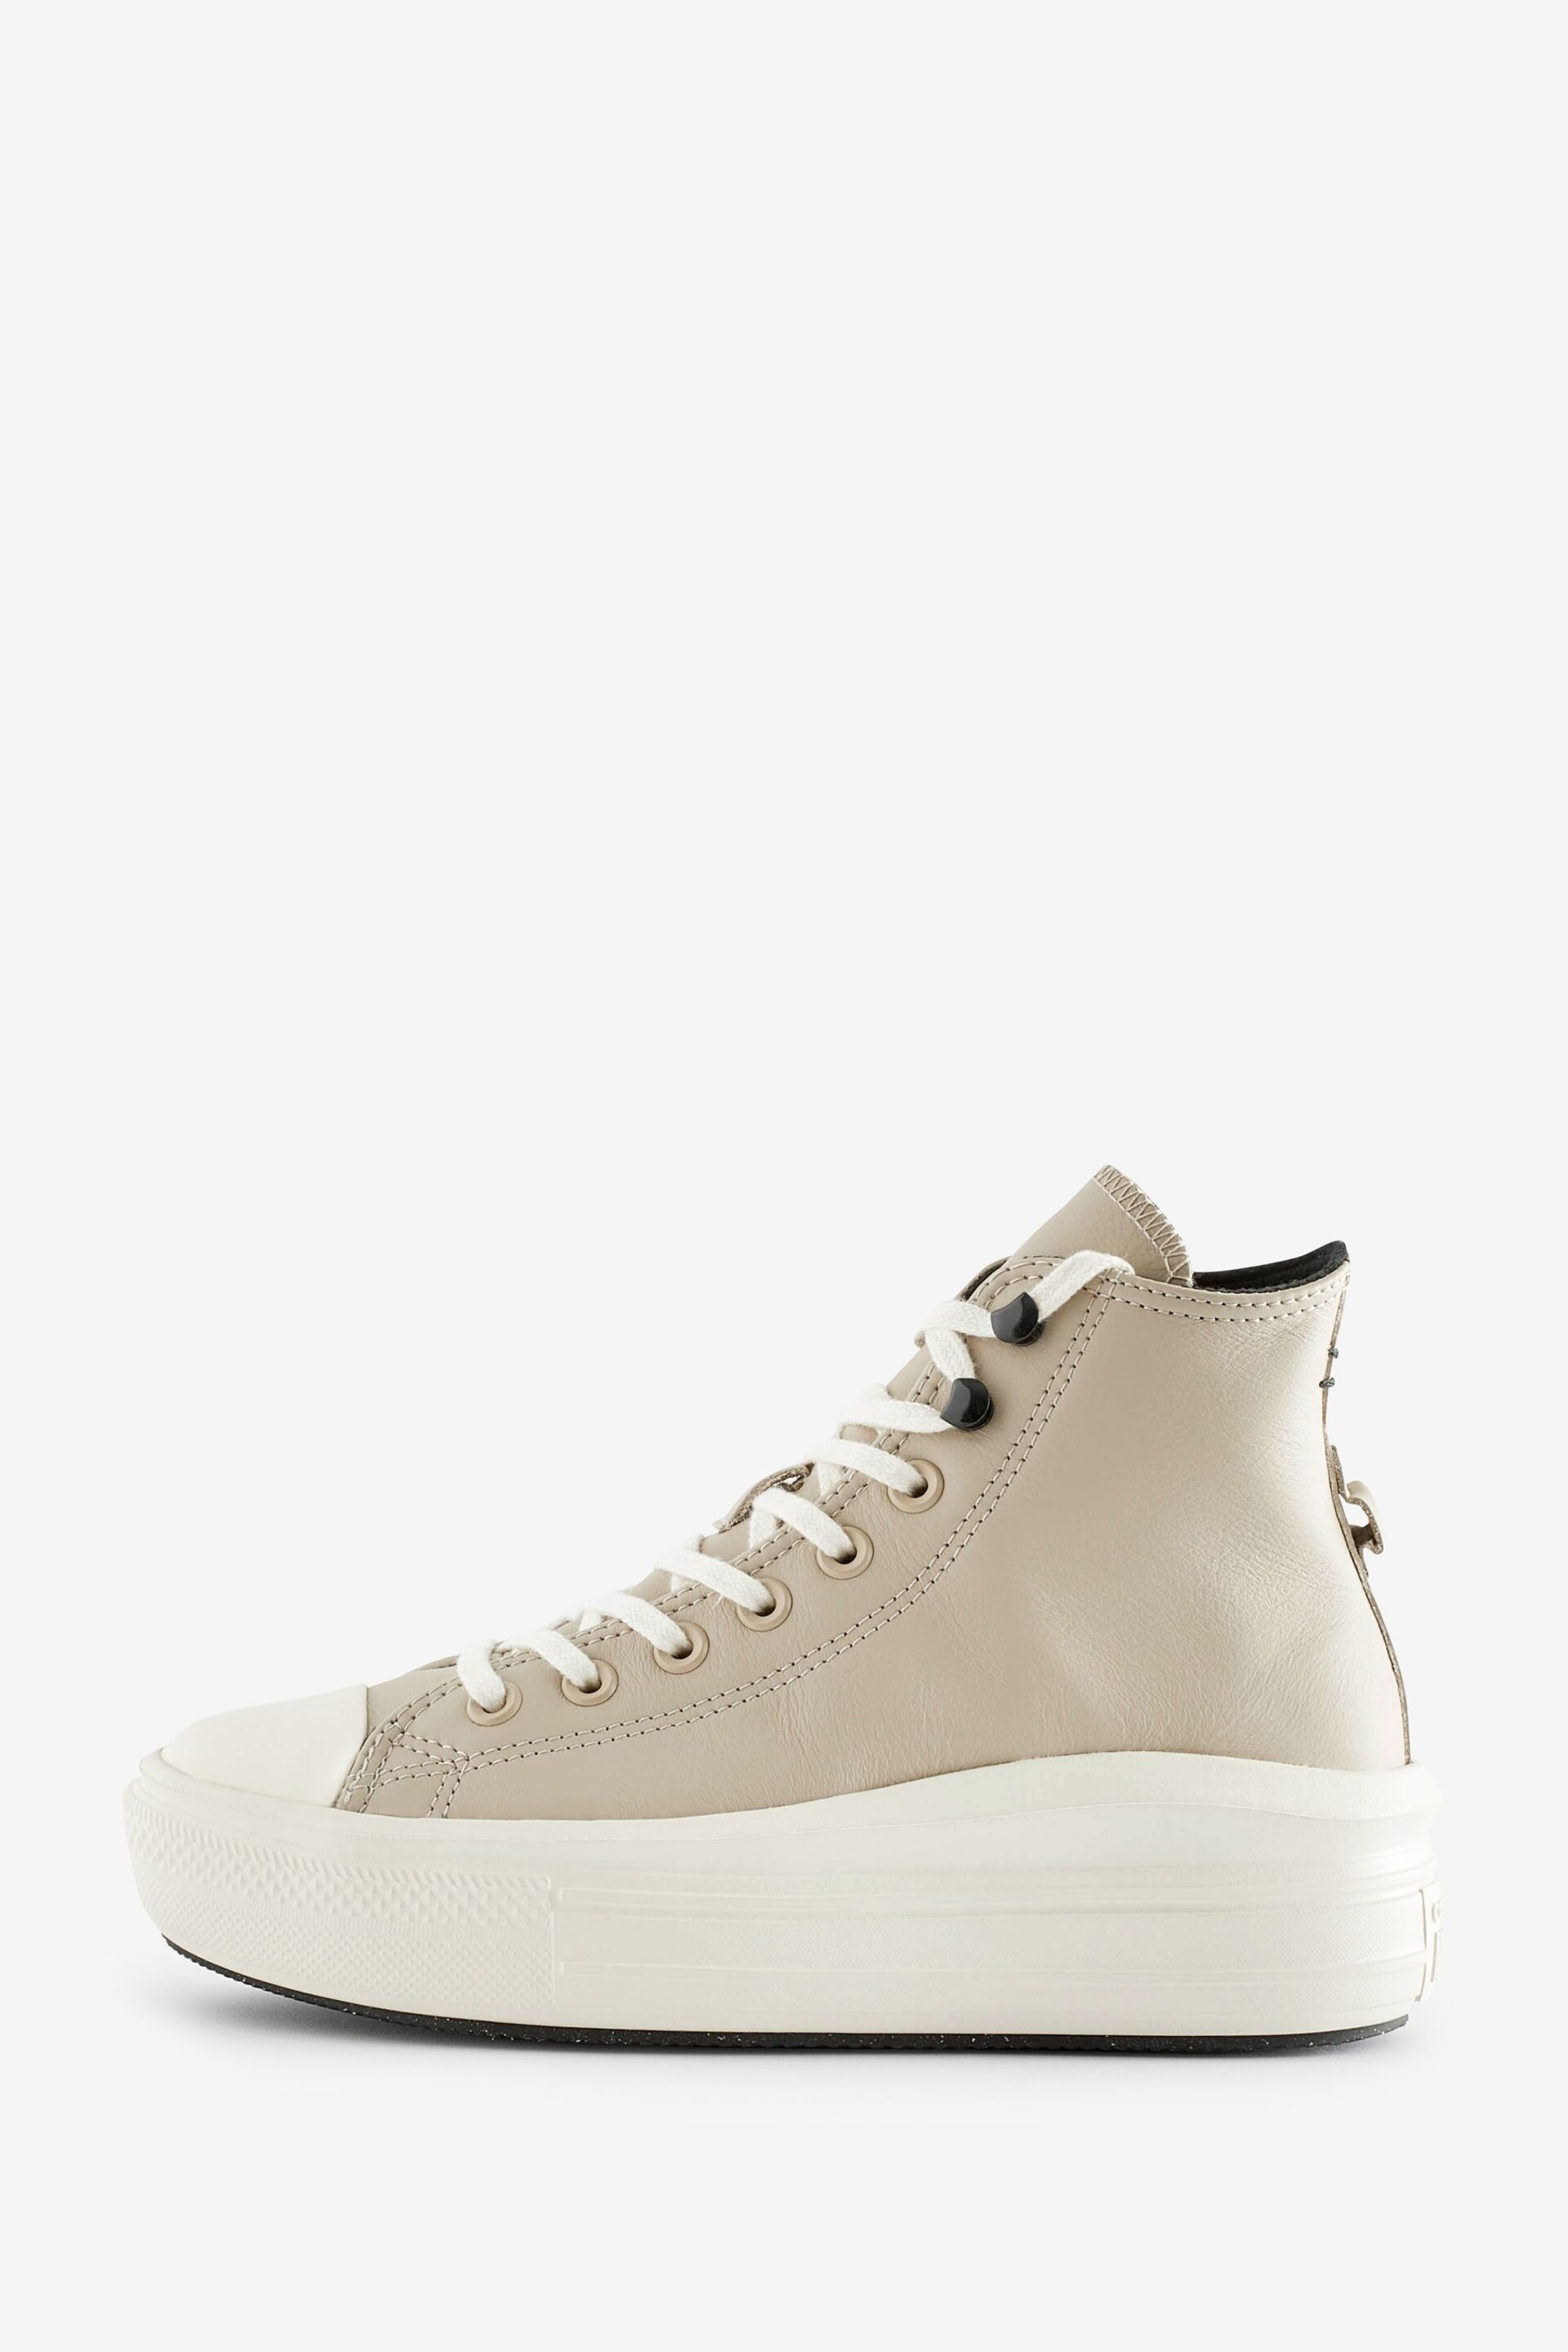 Converse Neutral Chuck Taylor All Star Move Platform Leather Trainers - Image 2 of 12